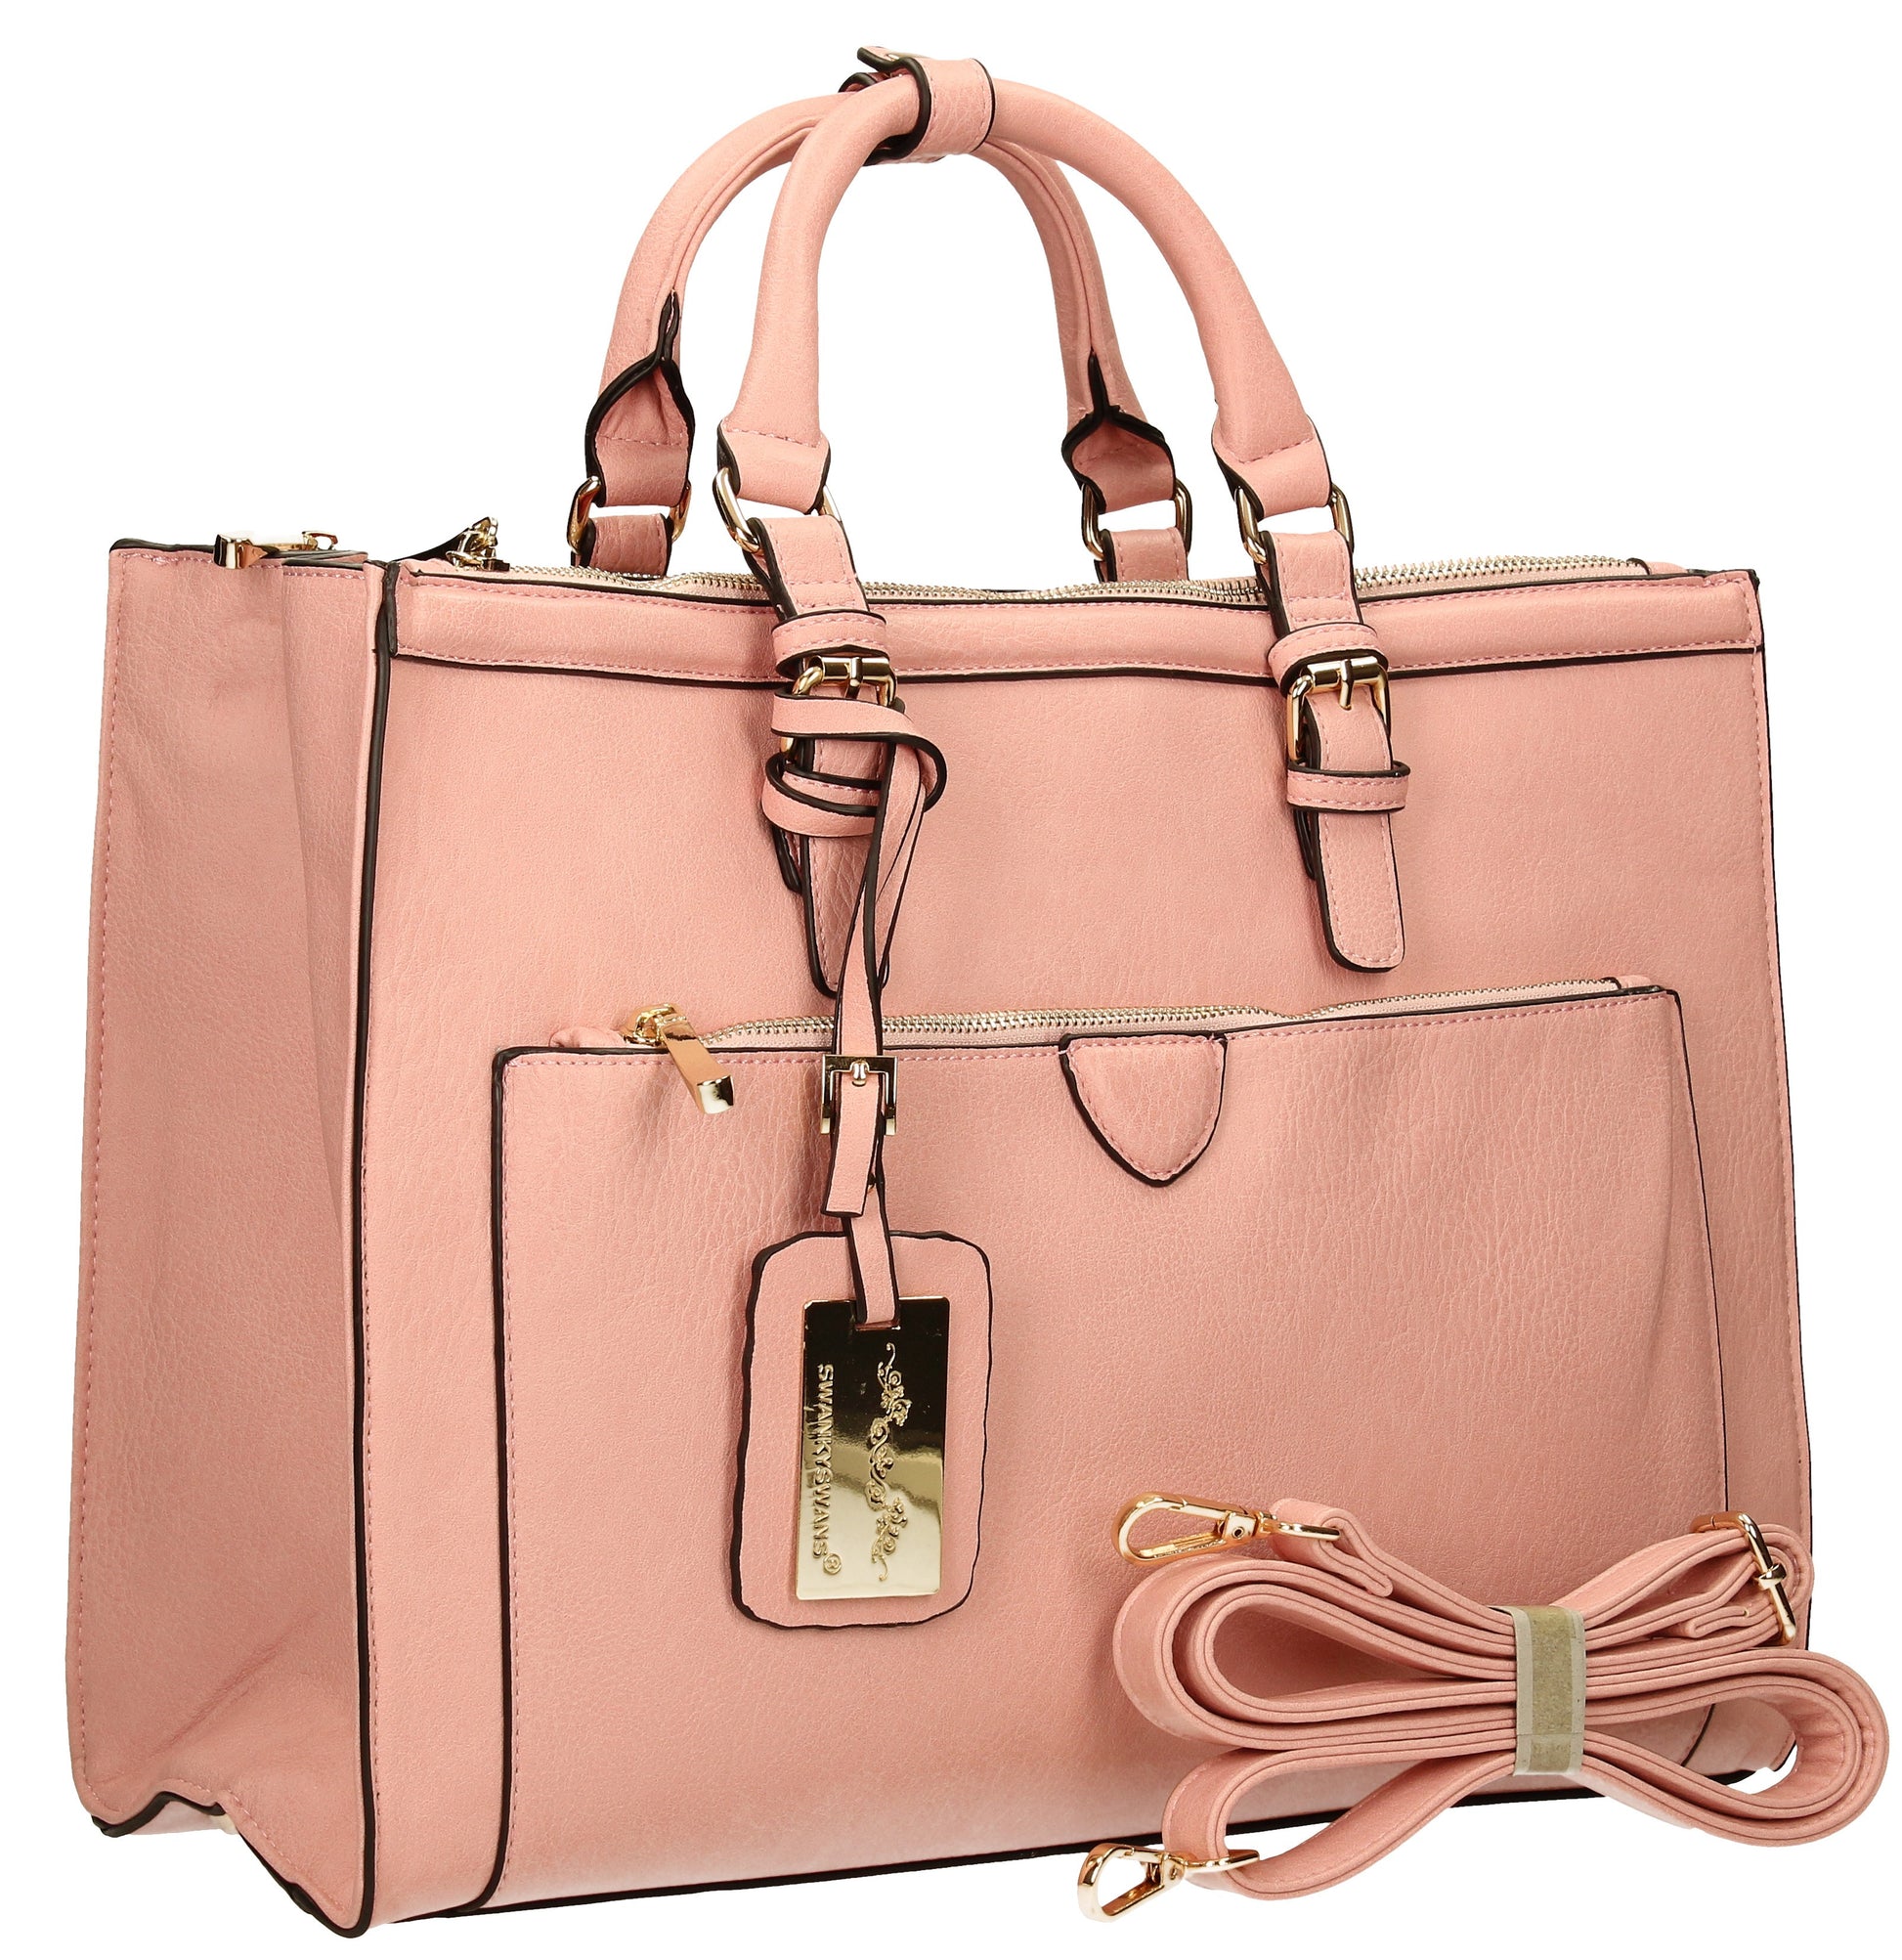 Swanky Swans Marcella Cosmo Handbag PinkPerfect for School, Weddings, Day out!